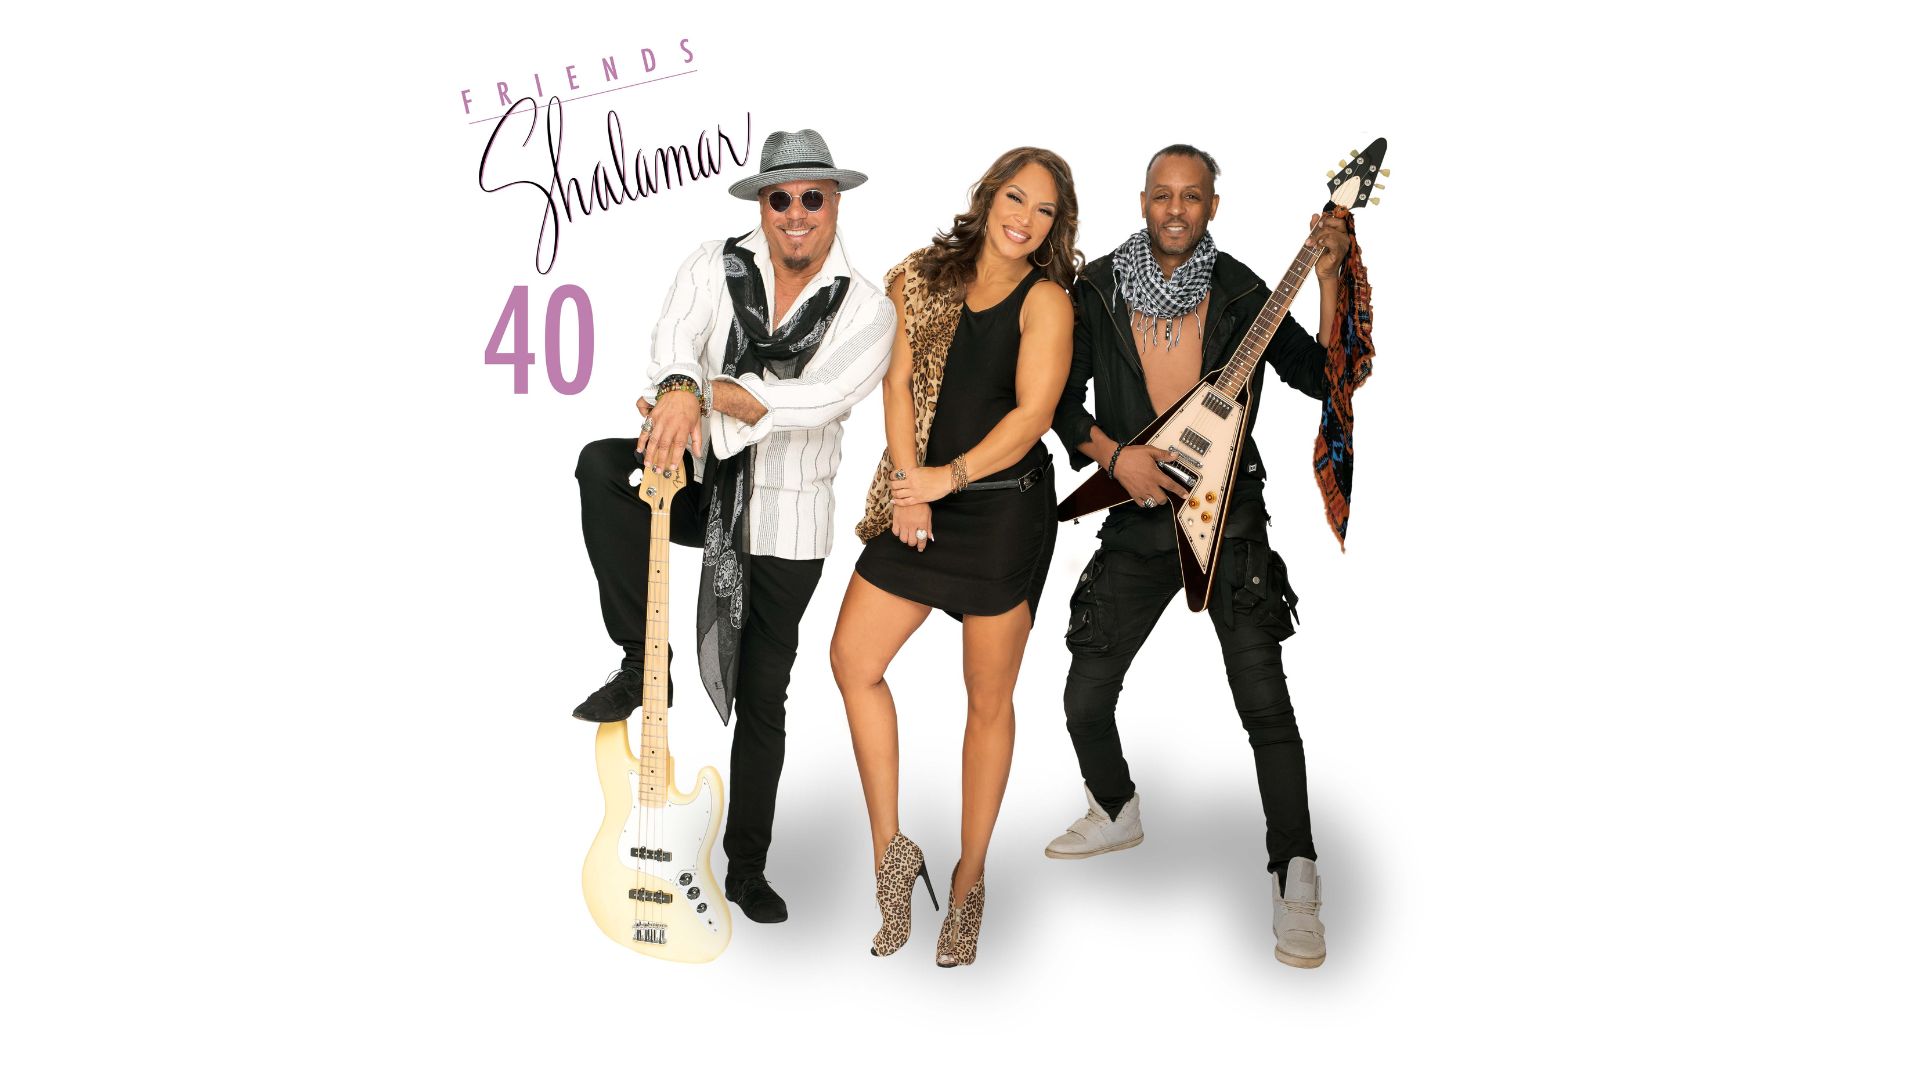 A lady in a short black dress stands between two men one with guitar the other with a bass